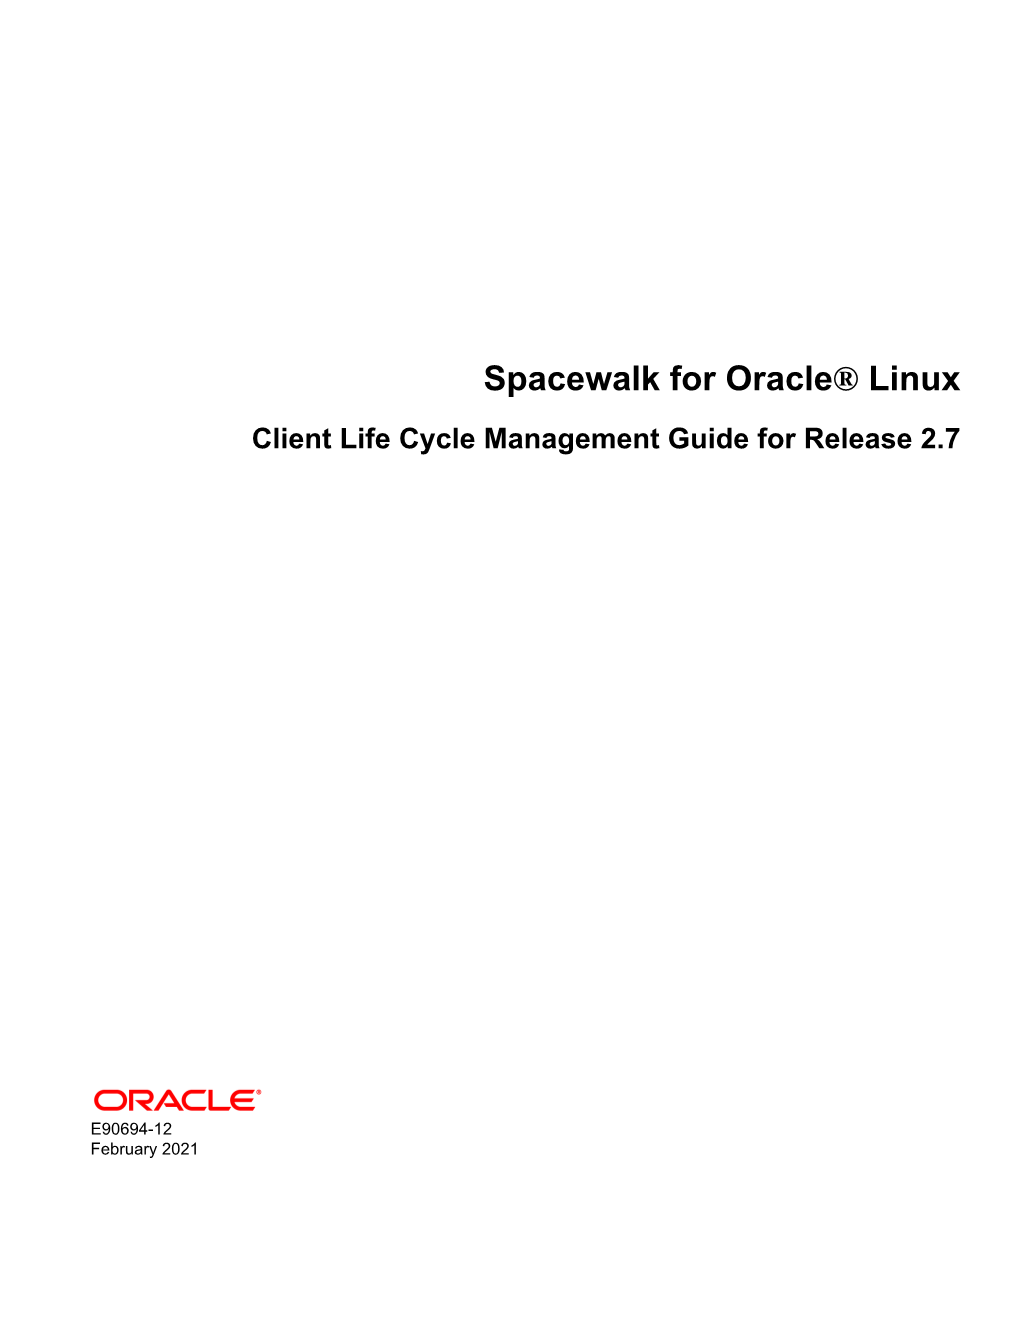 Spacewalk for Oracle® Linux Client Life Cycle Management Guide for Release 2.7